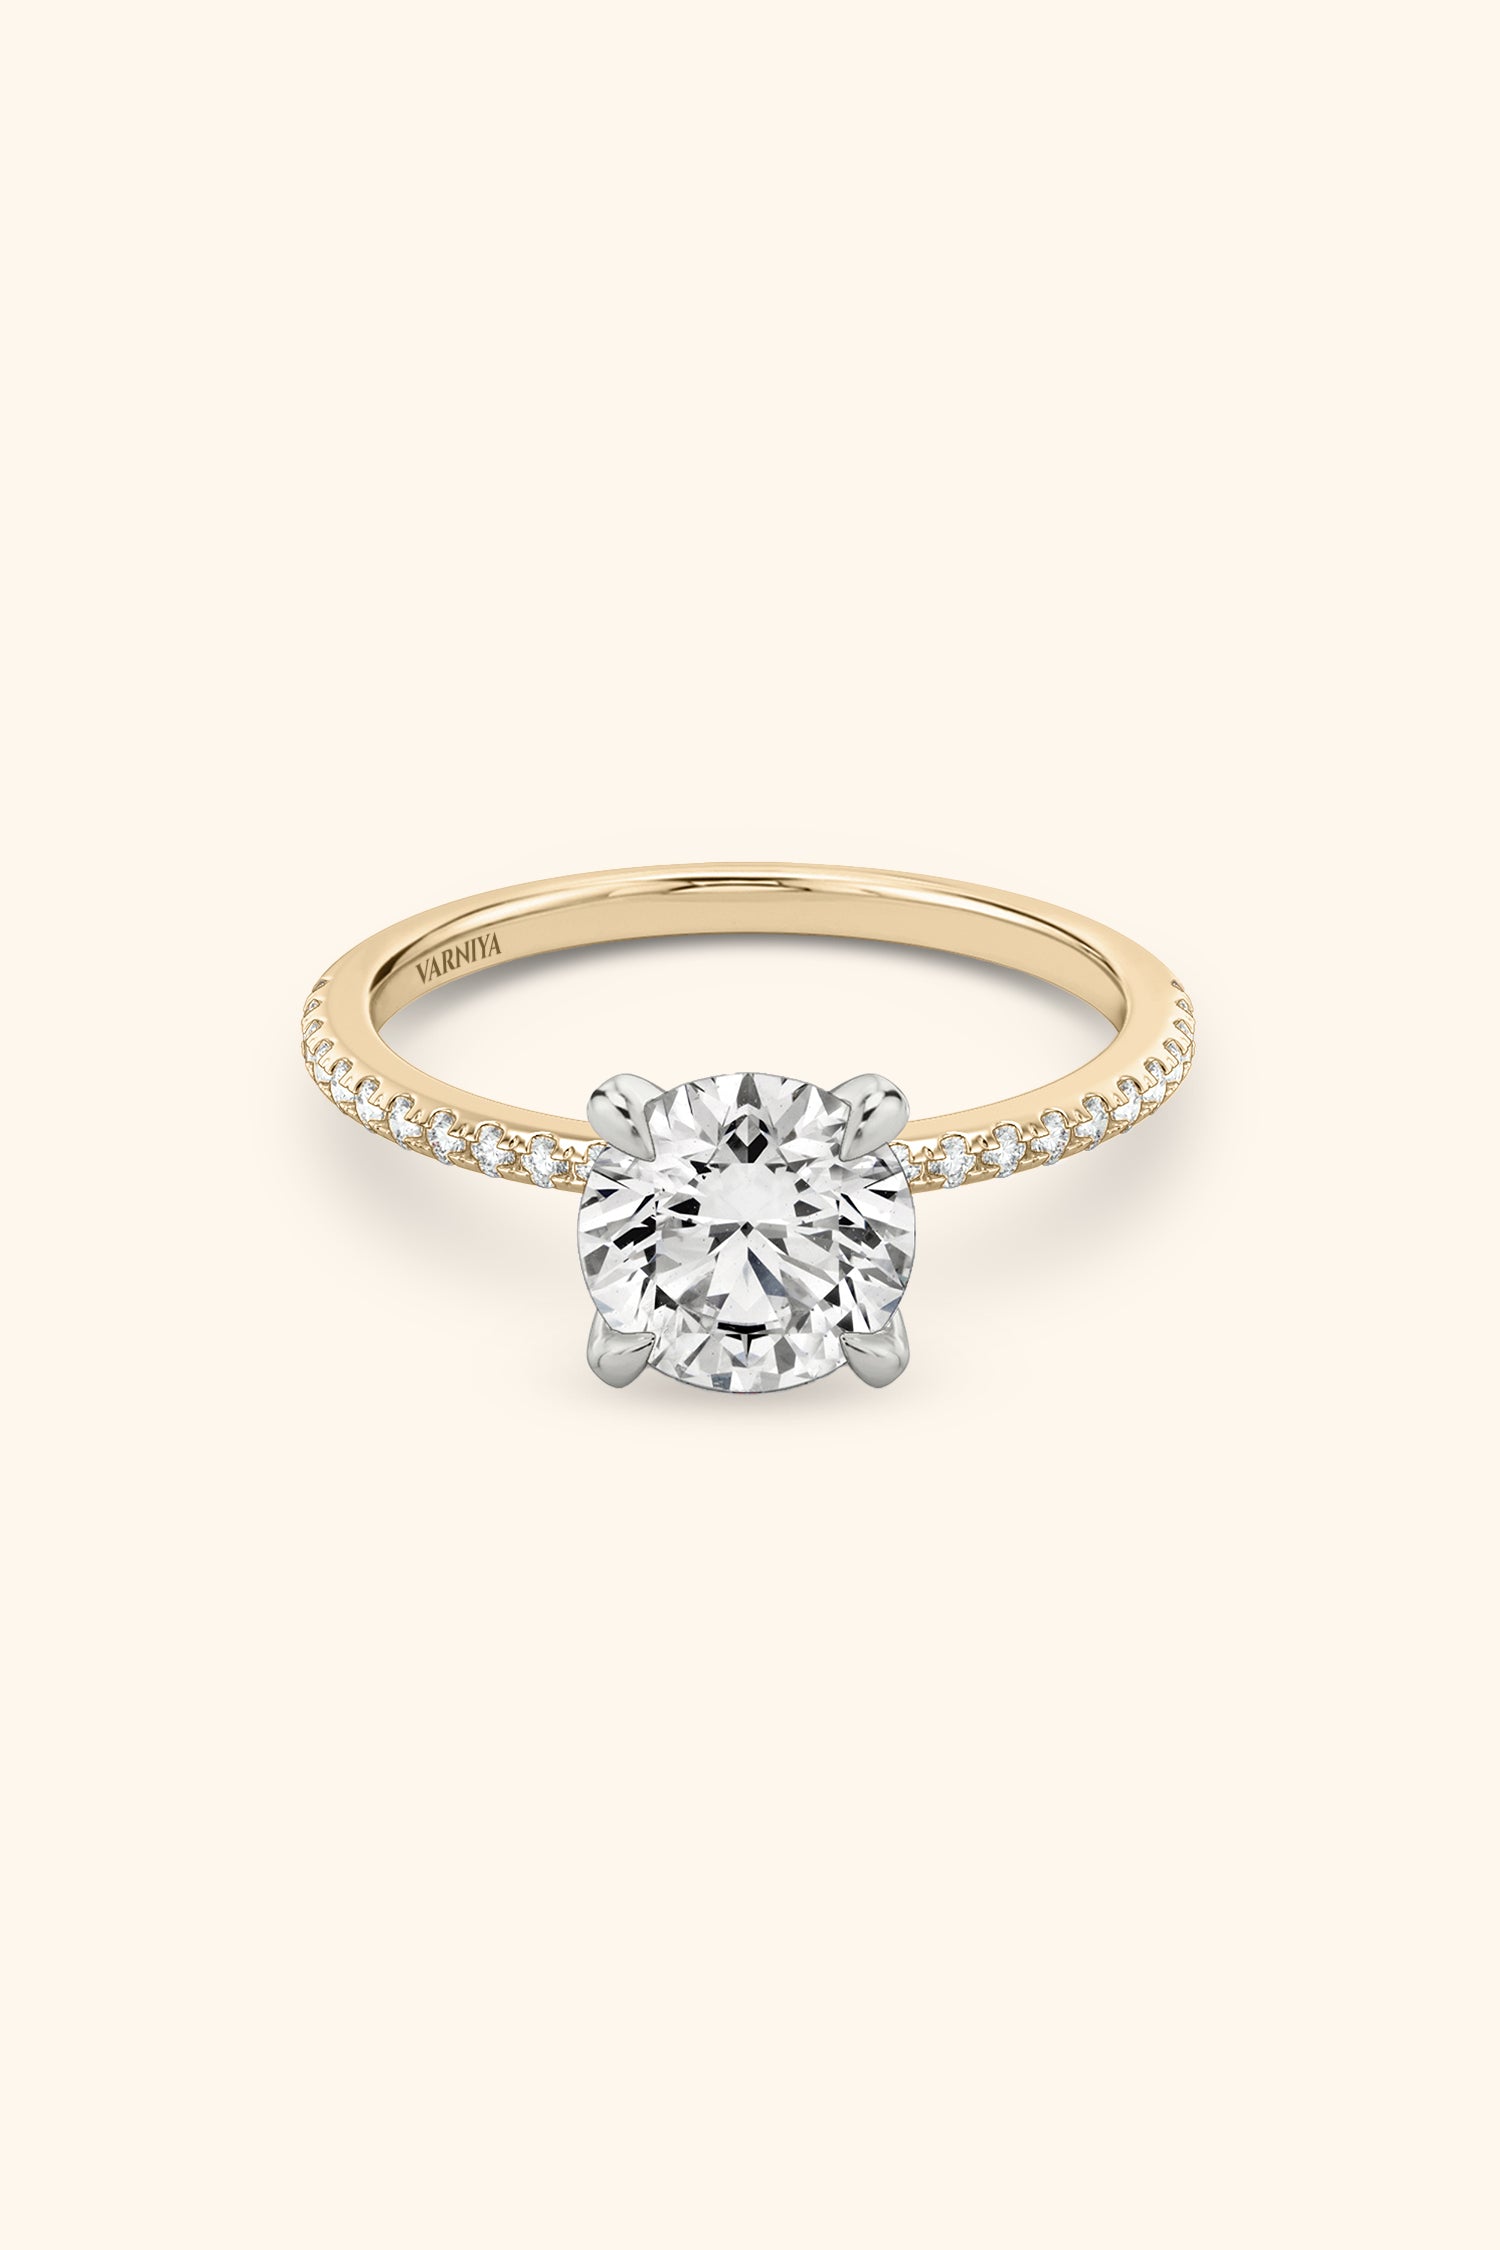 Dual Tone Glance Pave Ring with 1 Carat Round Brilliant Solitaire